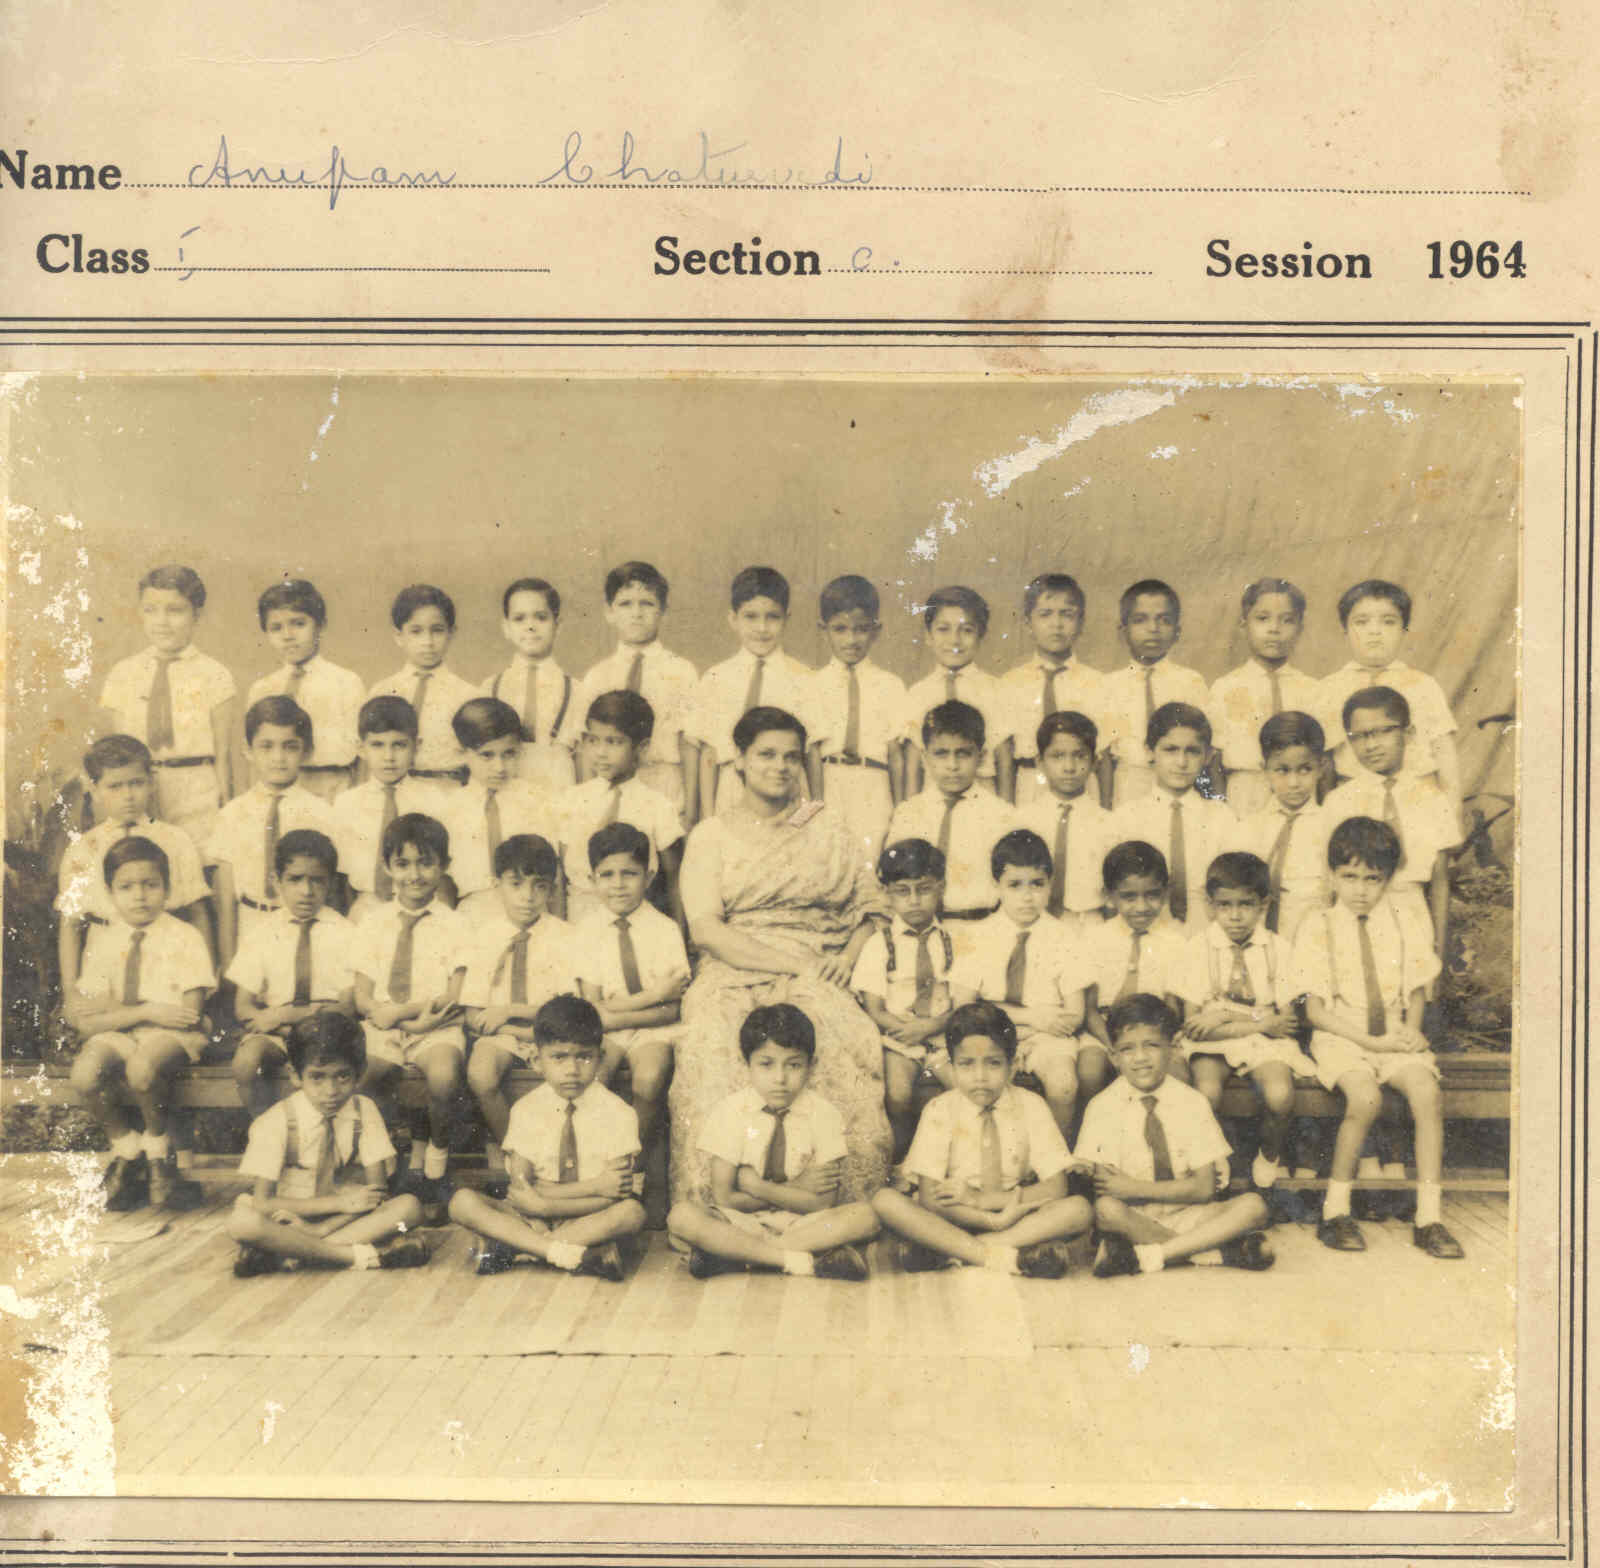 My 1st grade picture at Don Bosco School. TRY AND FIND ME !!